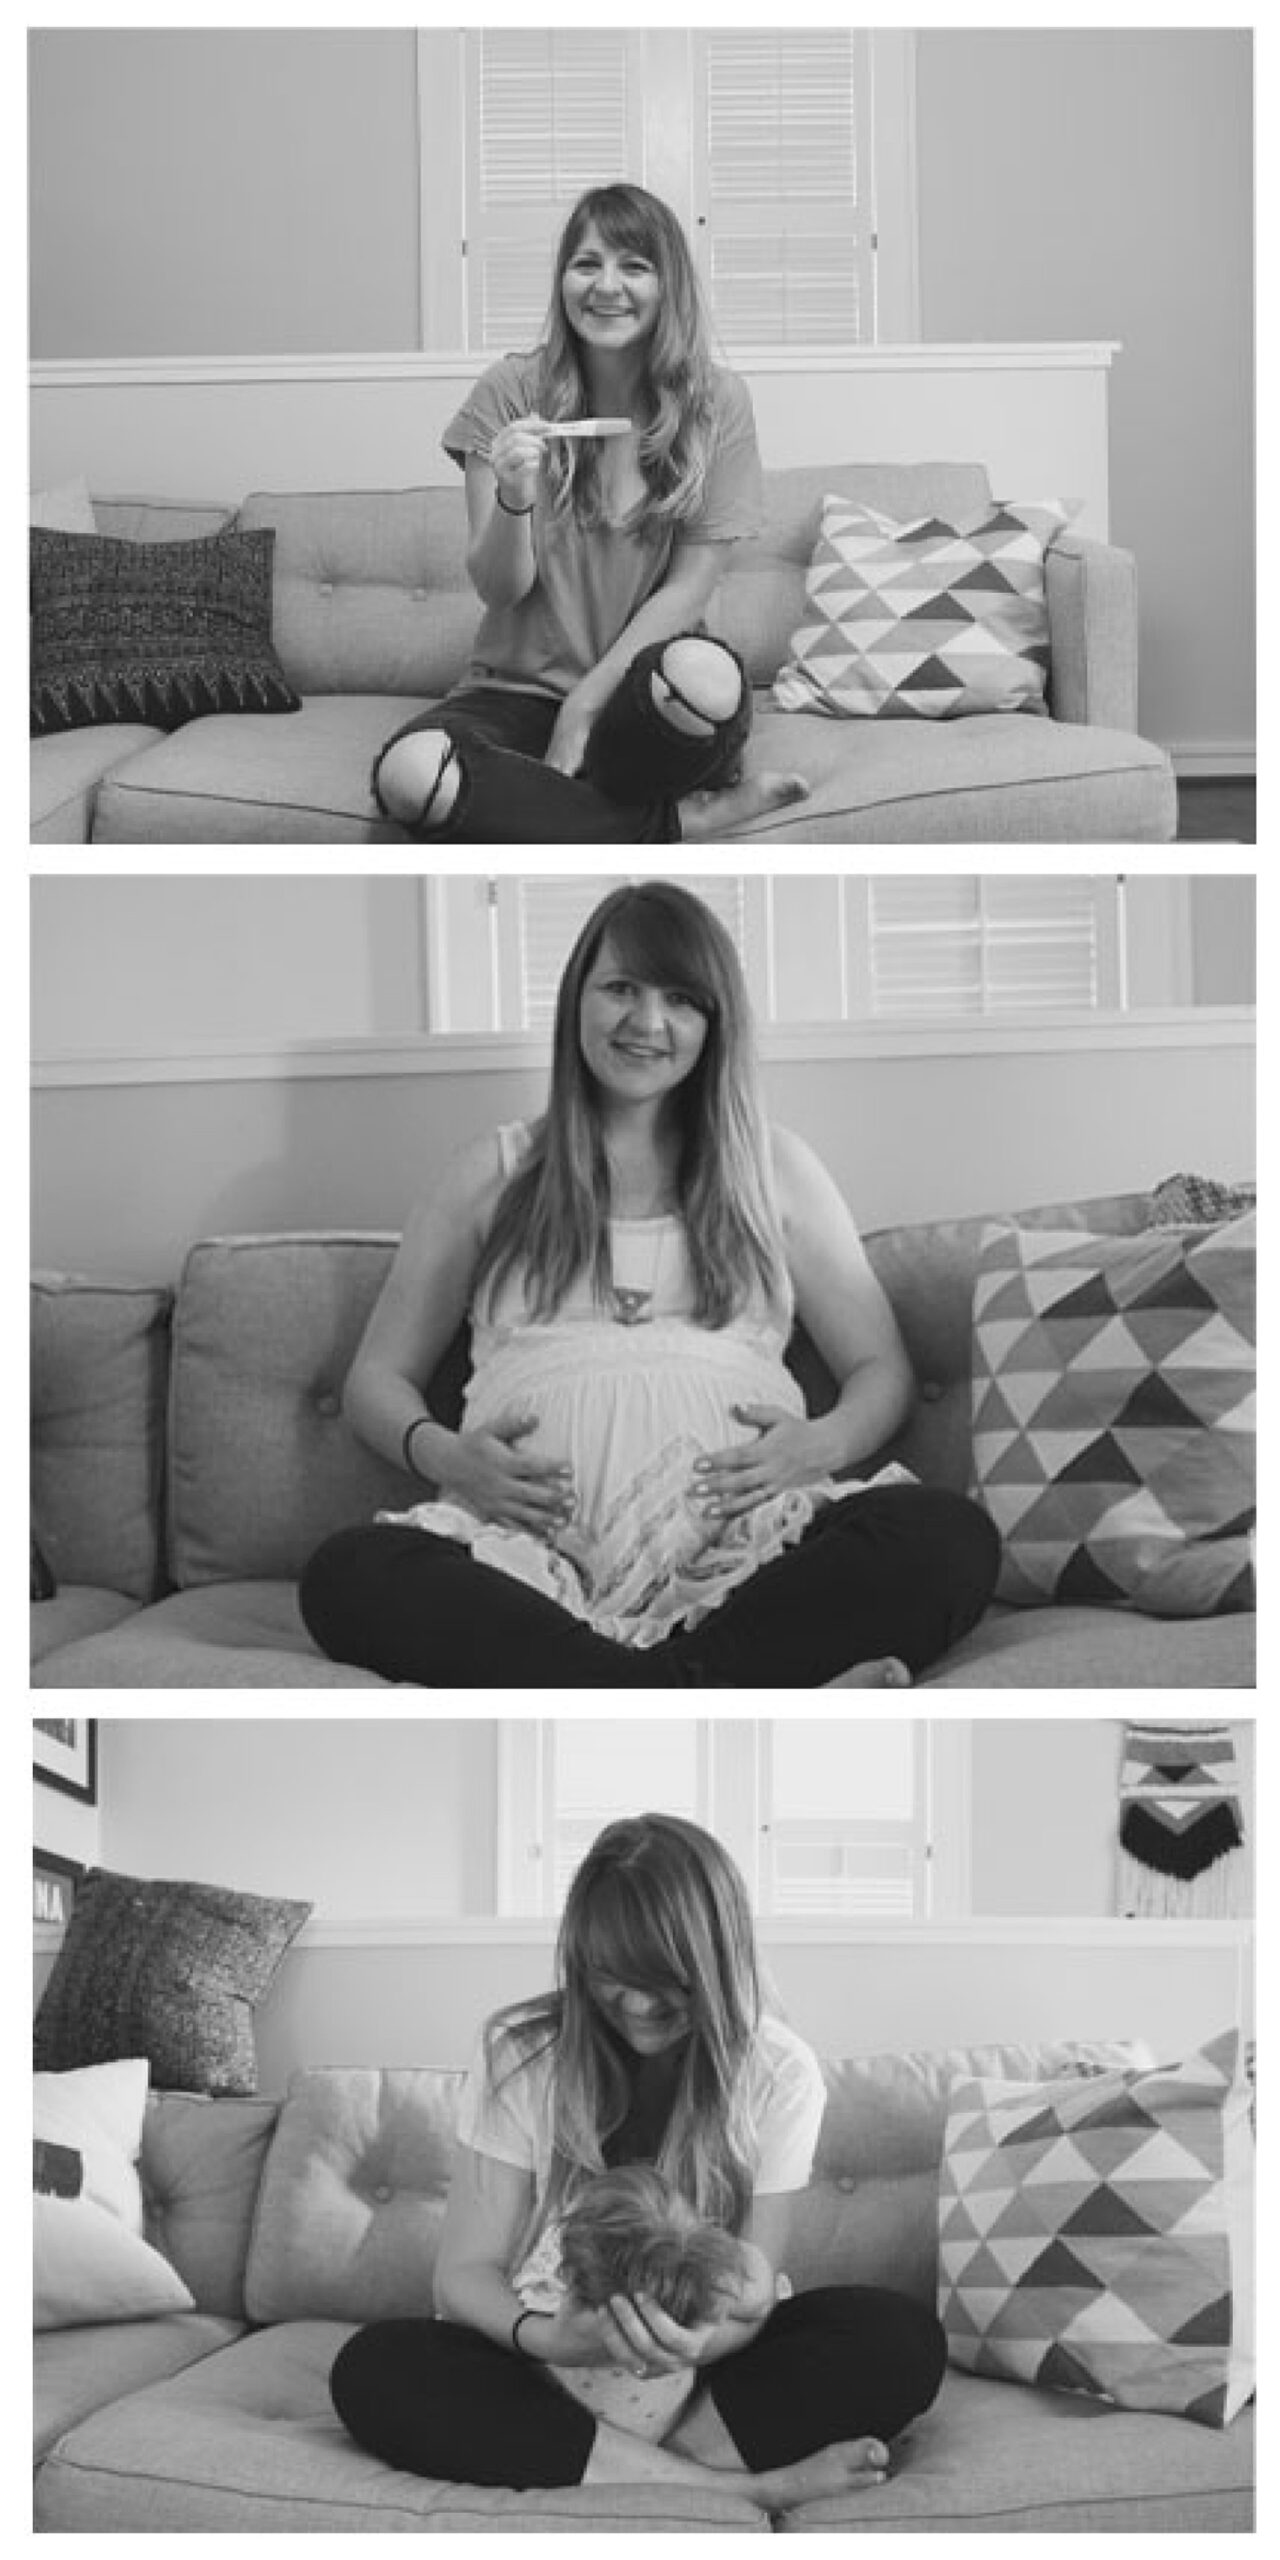 A series of three photos shows a woman holding a positive pregnancy test, sitting pregnant, and holding a newborn.